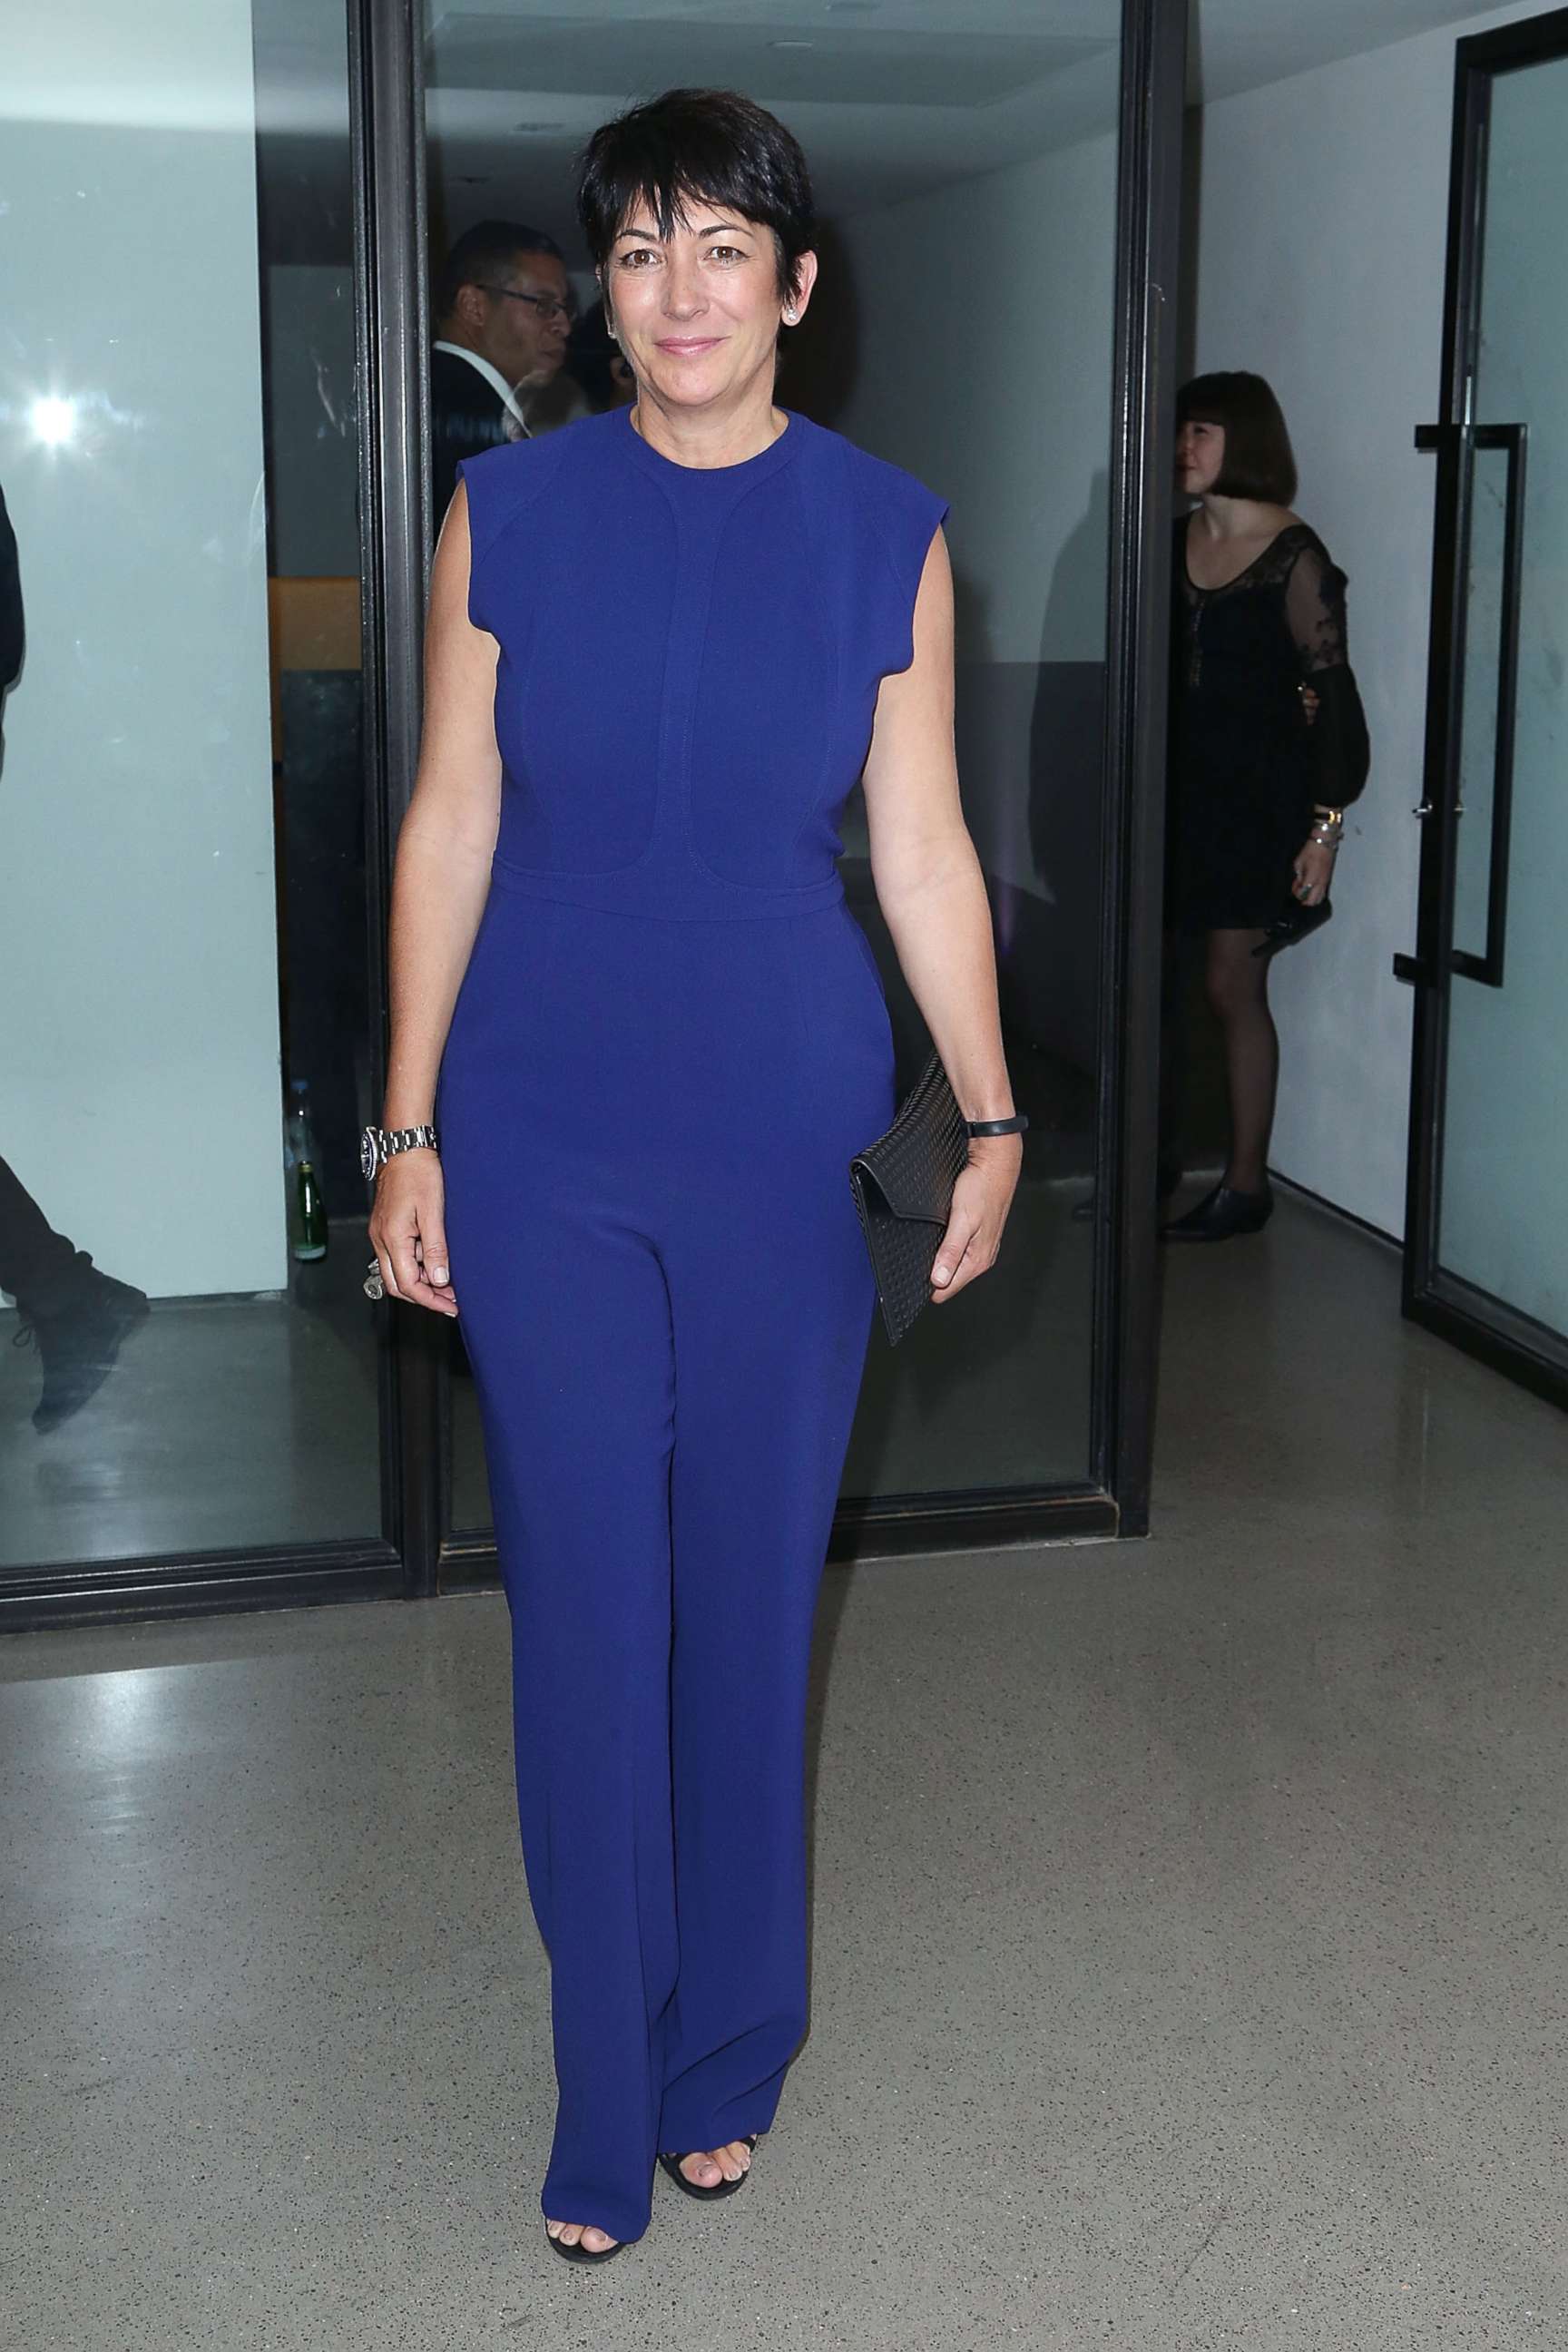 PHOTO: Ghislaine Maxwell attends an event, Oct. 18, 2016, in New York City.